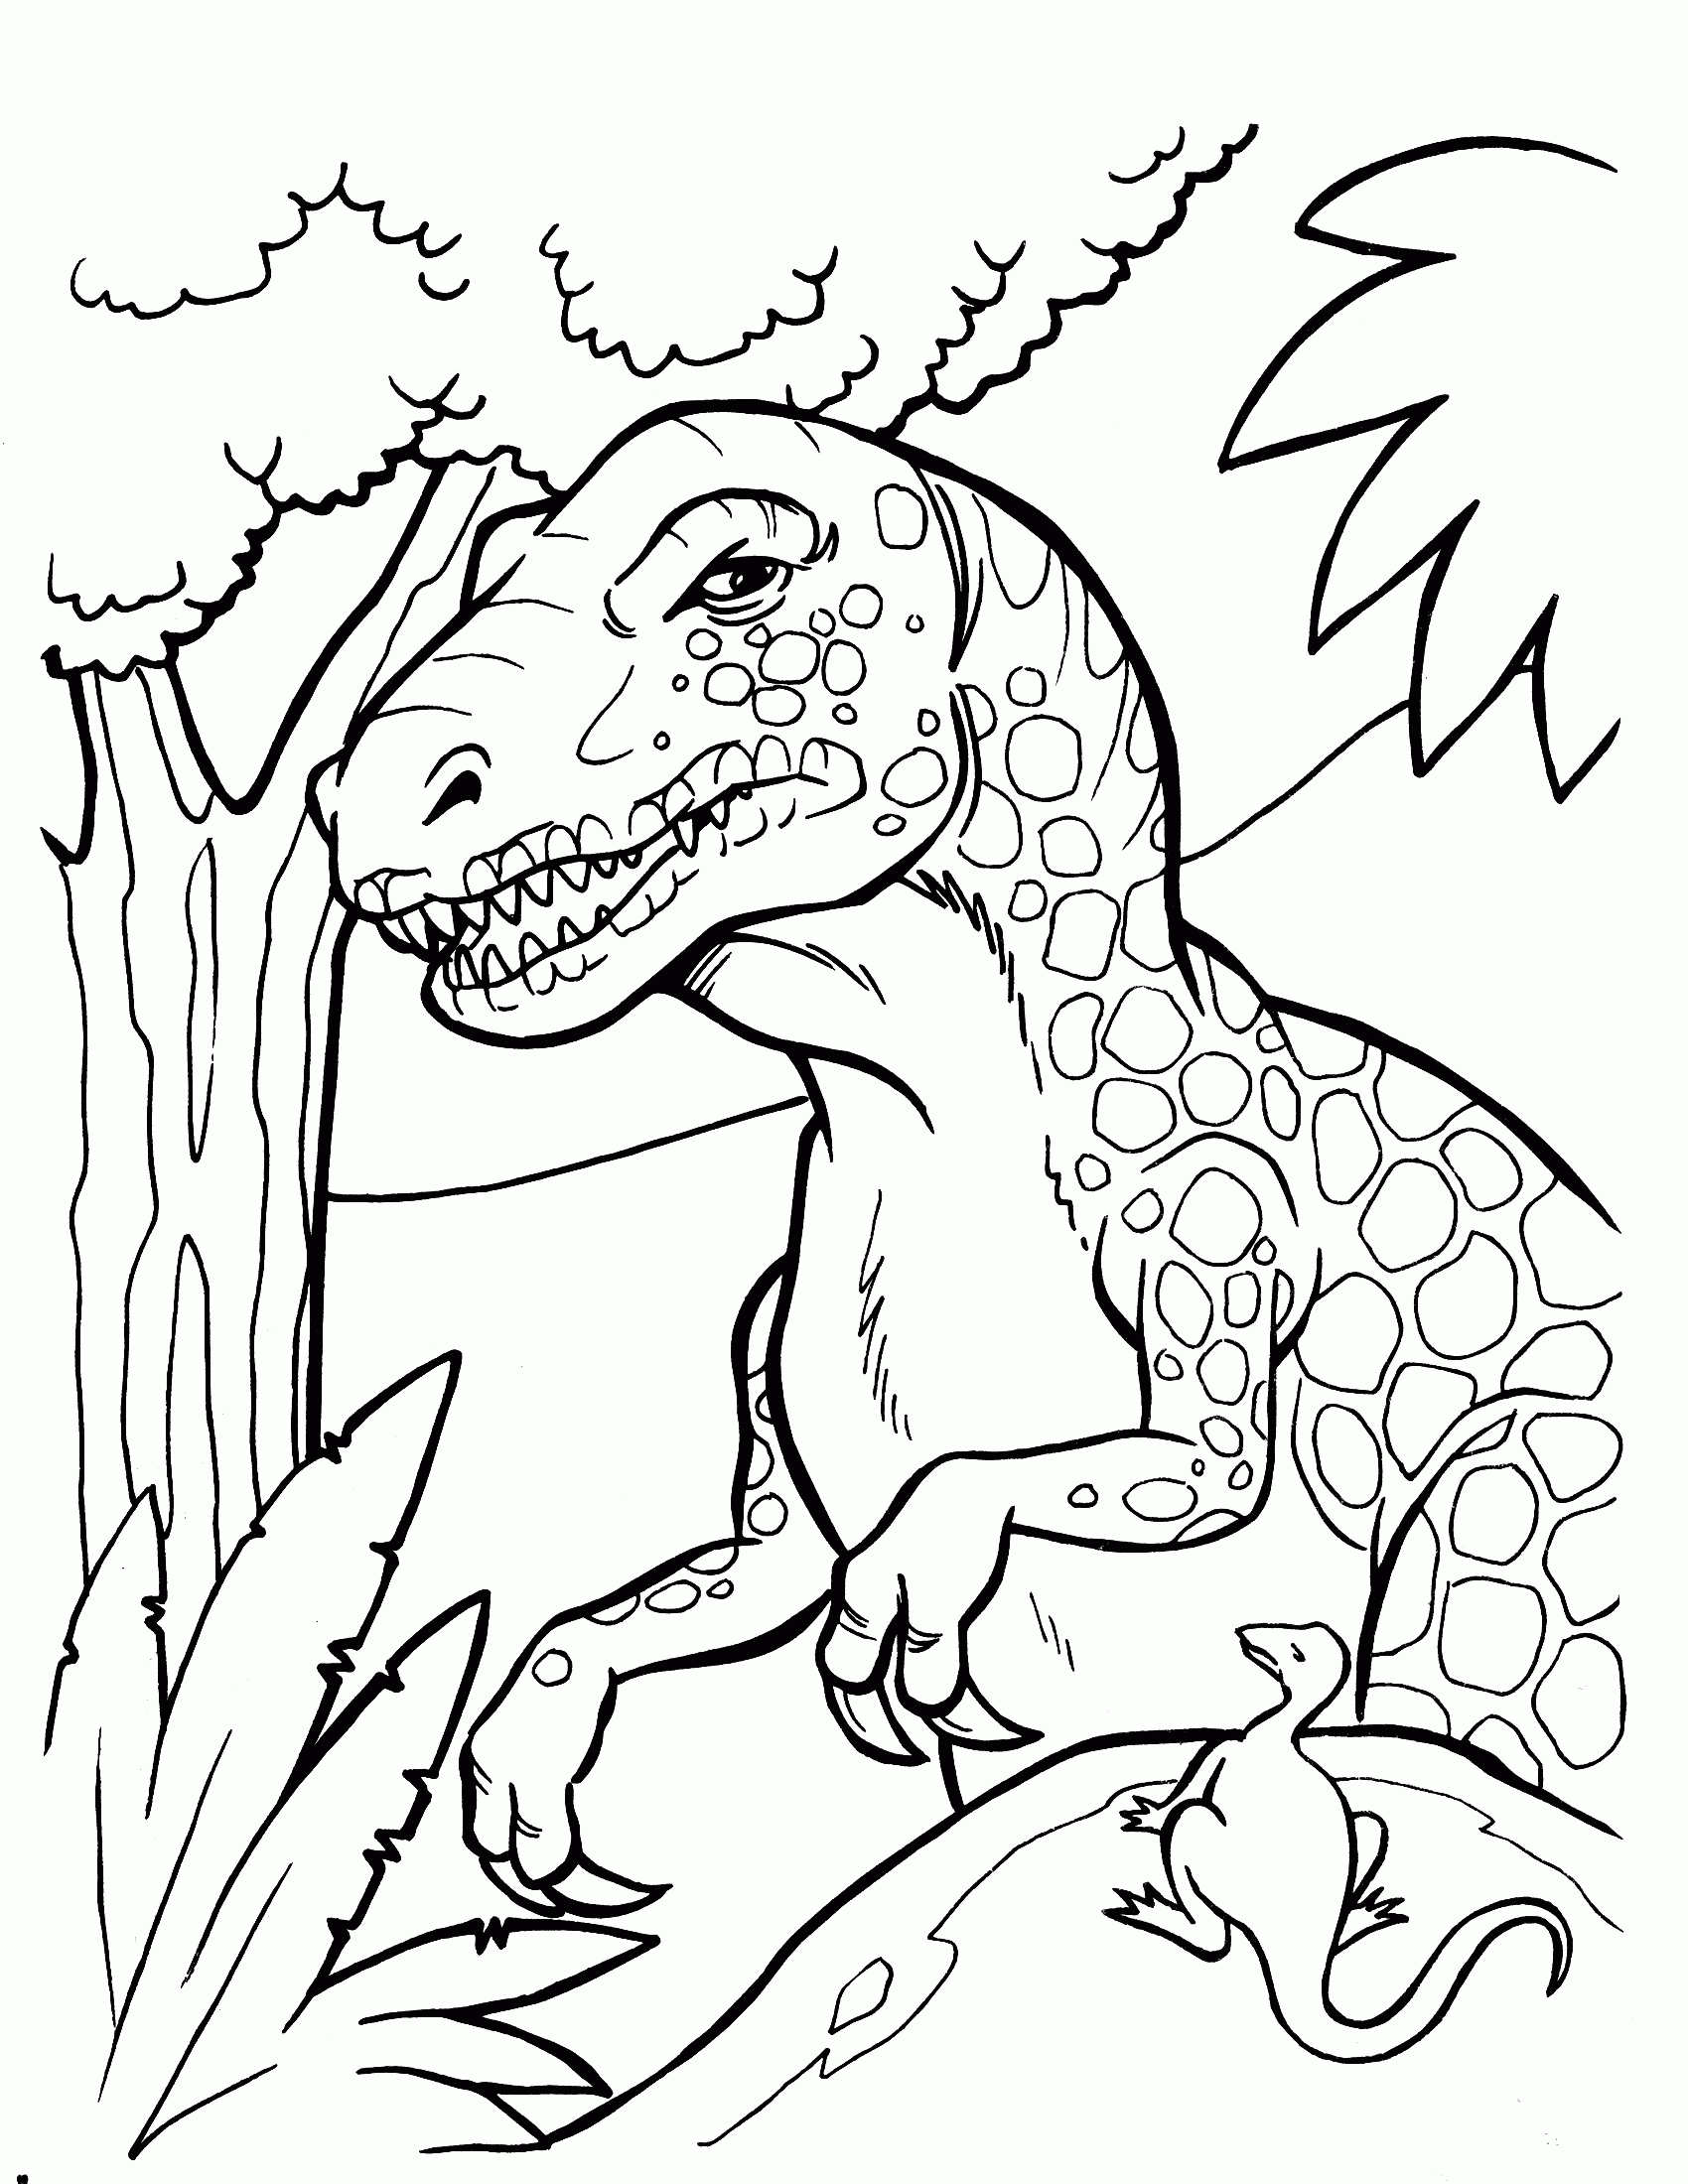 Free Printable Dinosaur Coloring Pages With Names Free Printable 